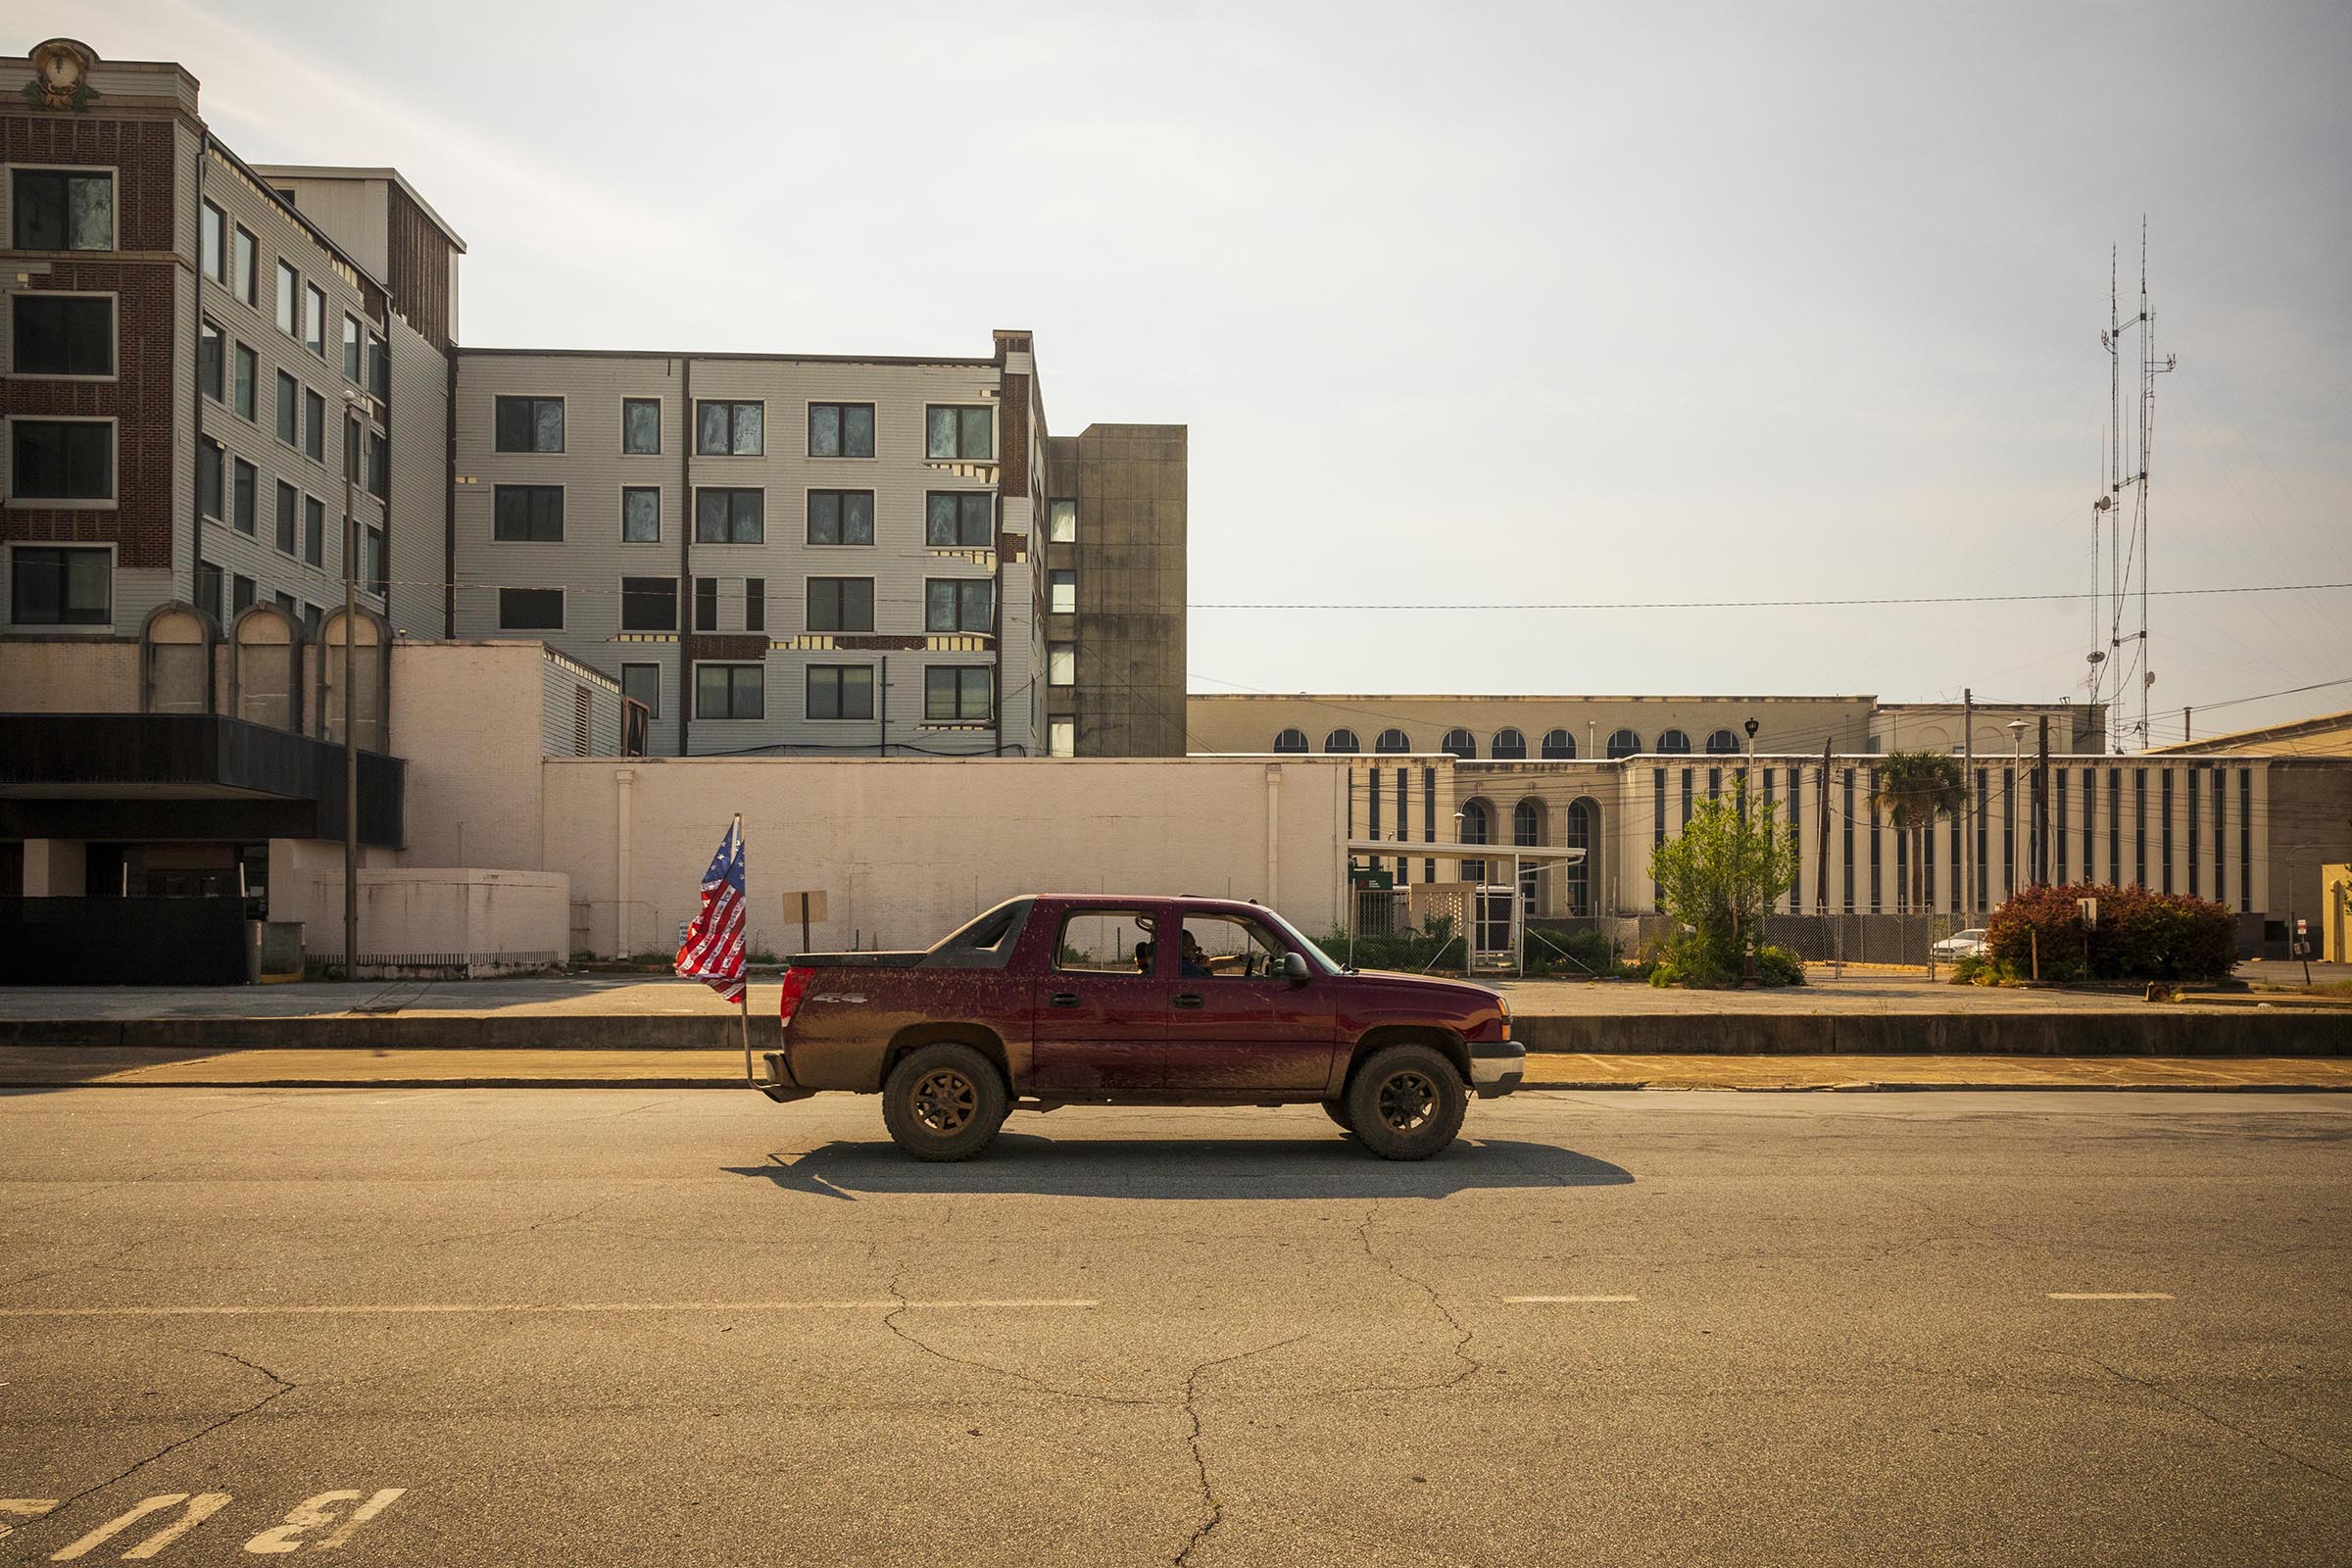 A quiet downtown Albany, Georgia on March 27, 2020. Albany has become a COVID hotspot. (Audra Melton—The New York Times/Redux)